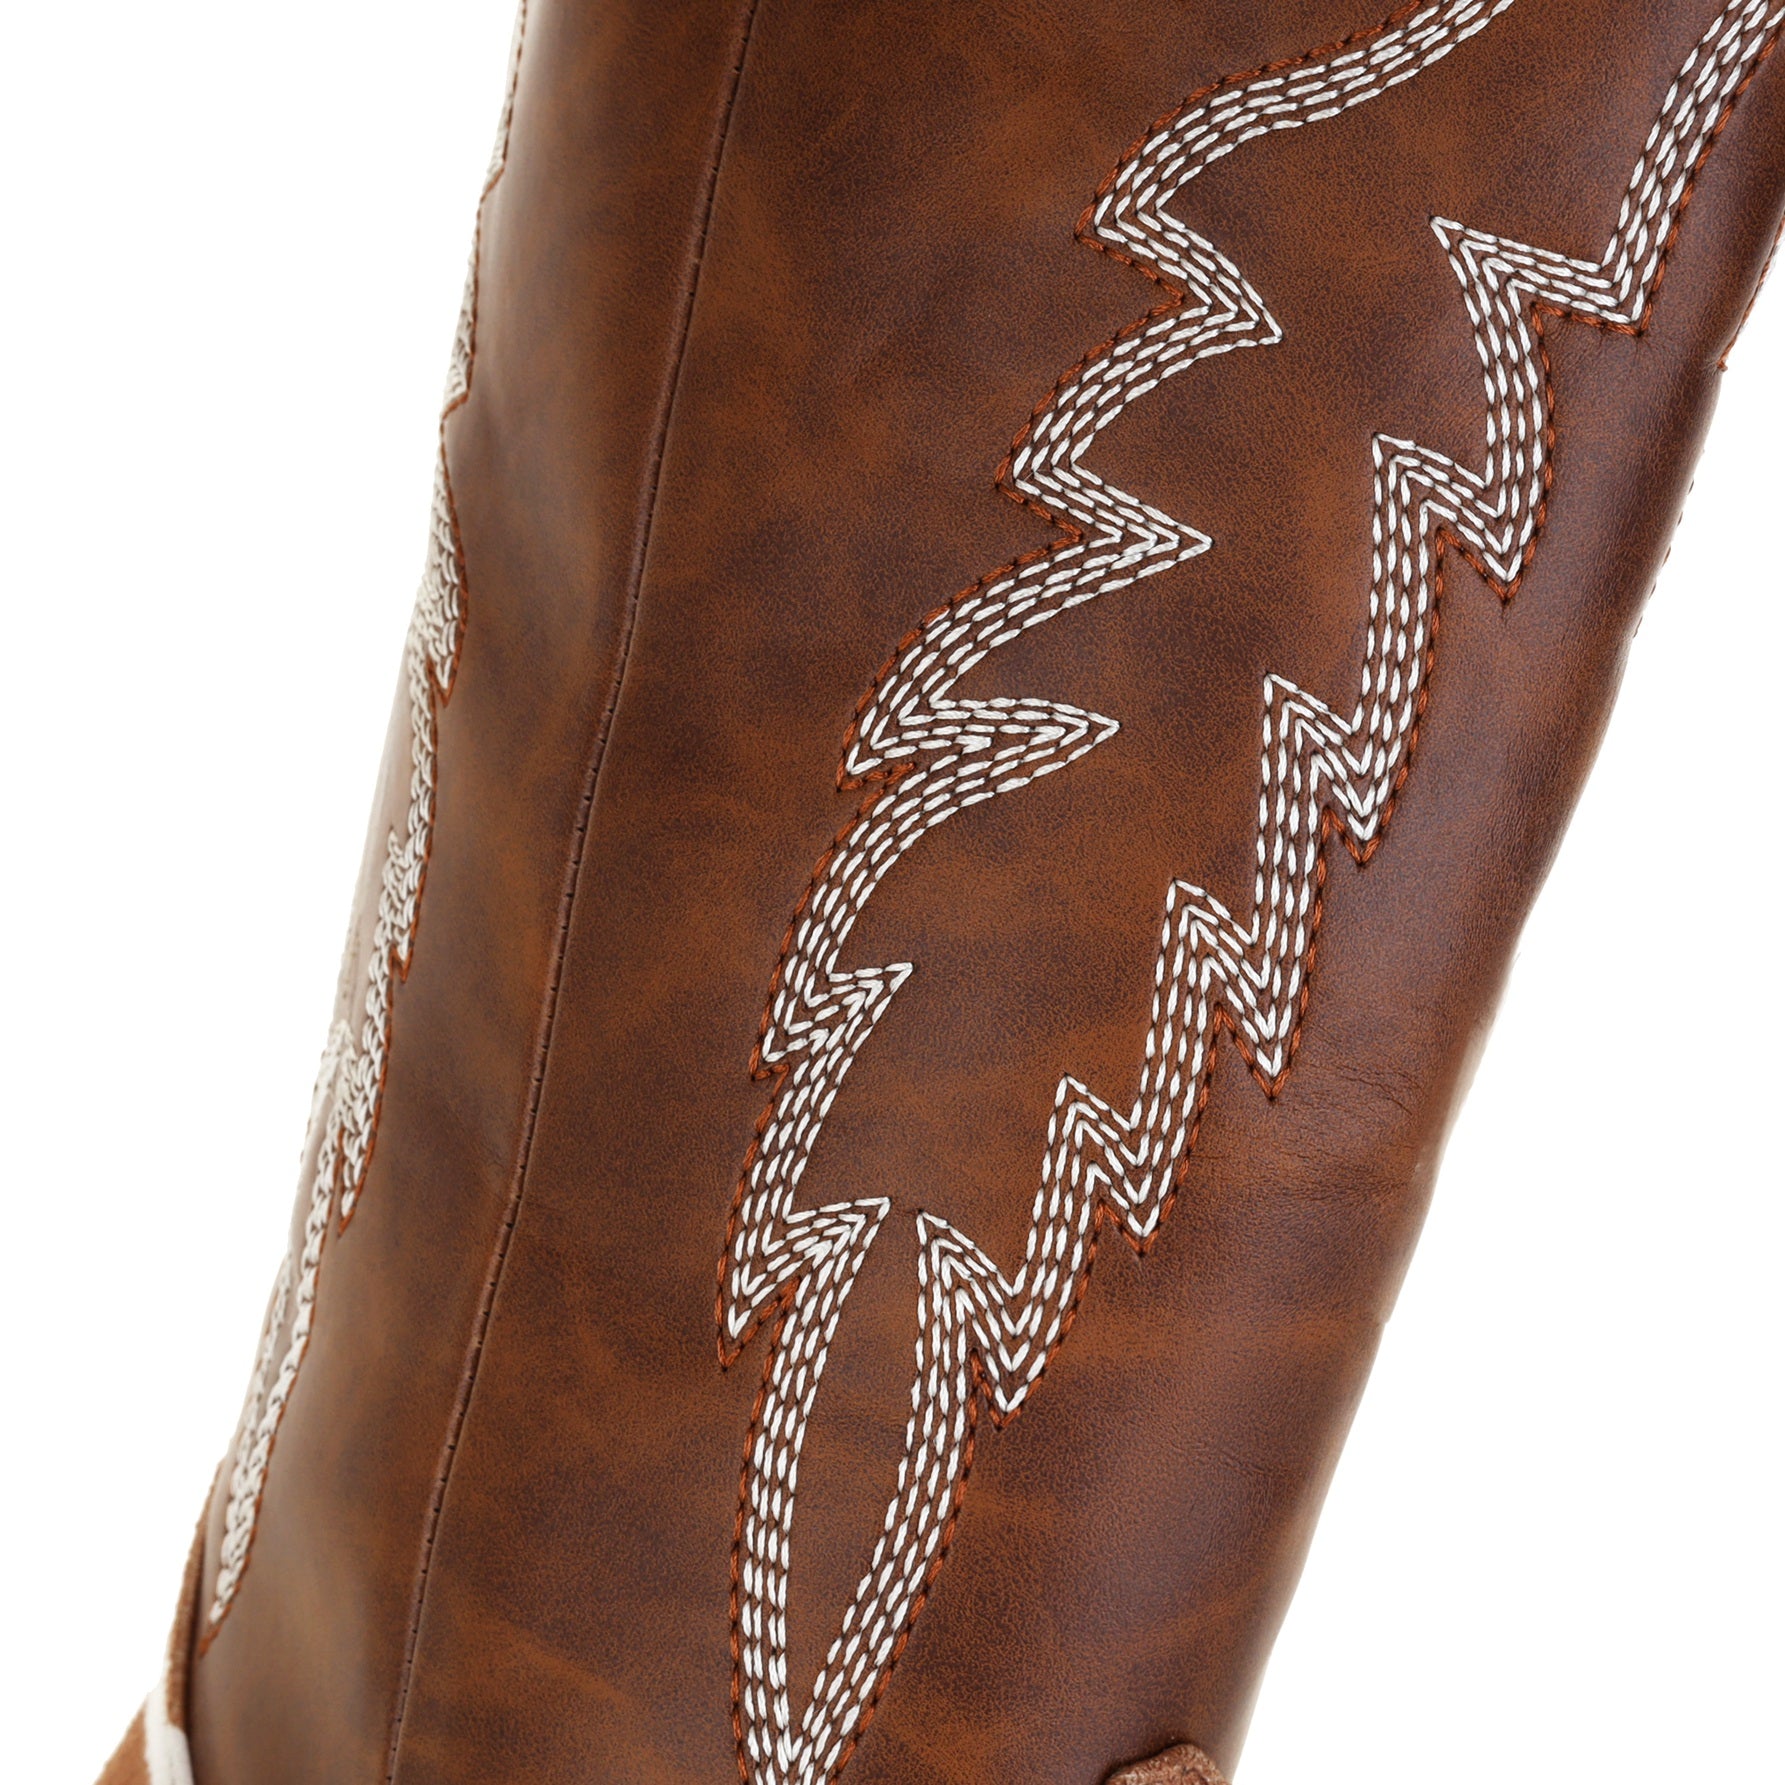 Bigsizeheels Western vintage Cow pattern embroidery boots - Brown freeshipping - bigsizeheel®-size5-size15 -All Plus Sizes Available!